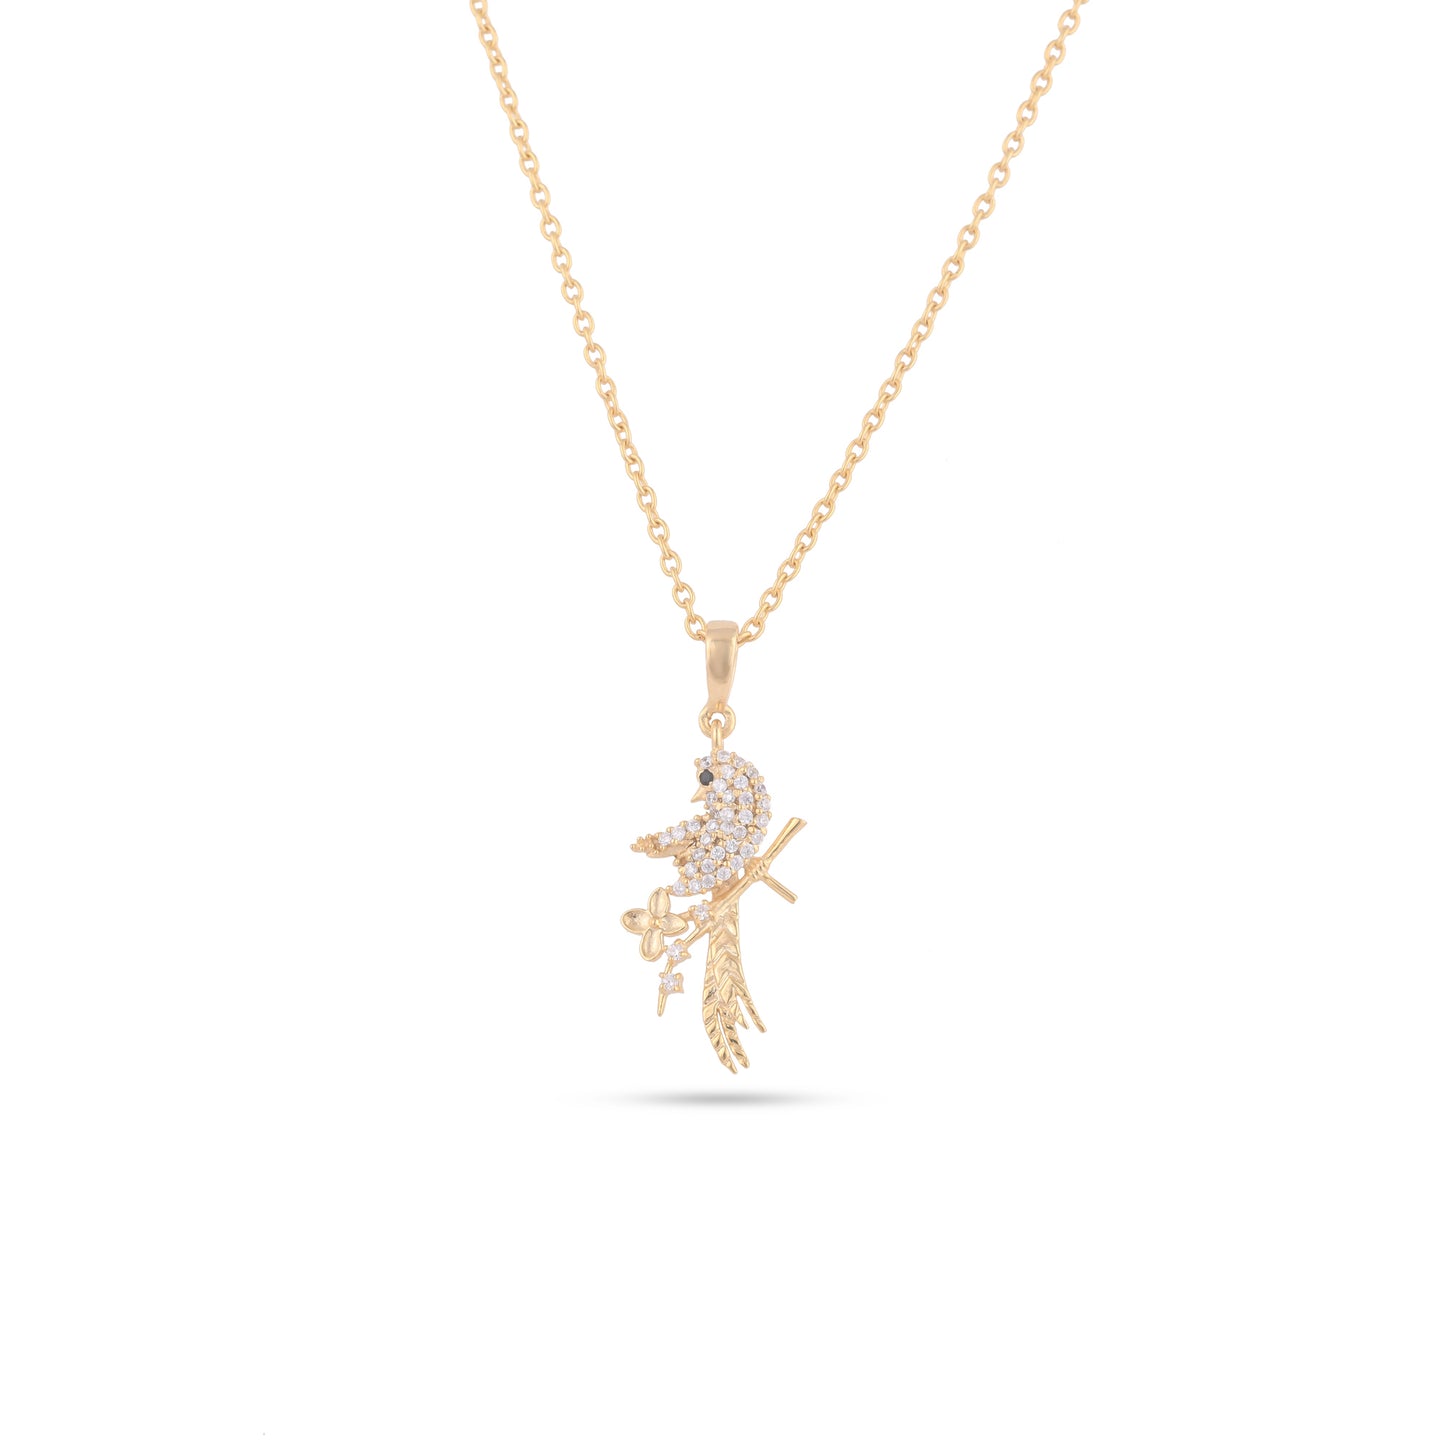 Elegant Bird Studded Silver Necklace Gold Plated - From Purl Purl